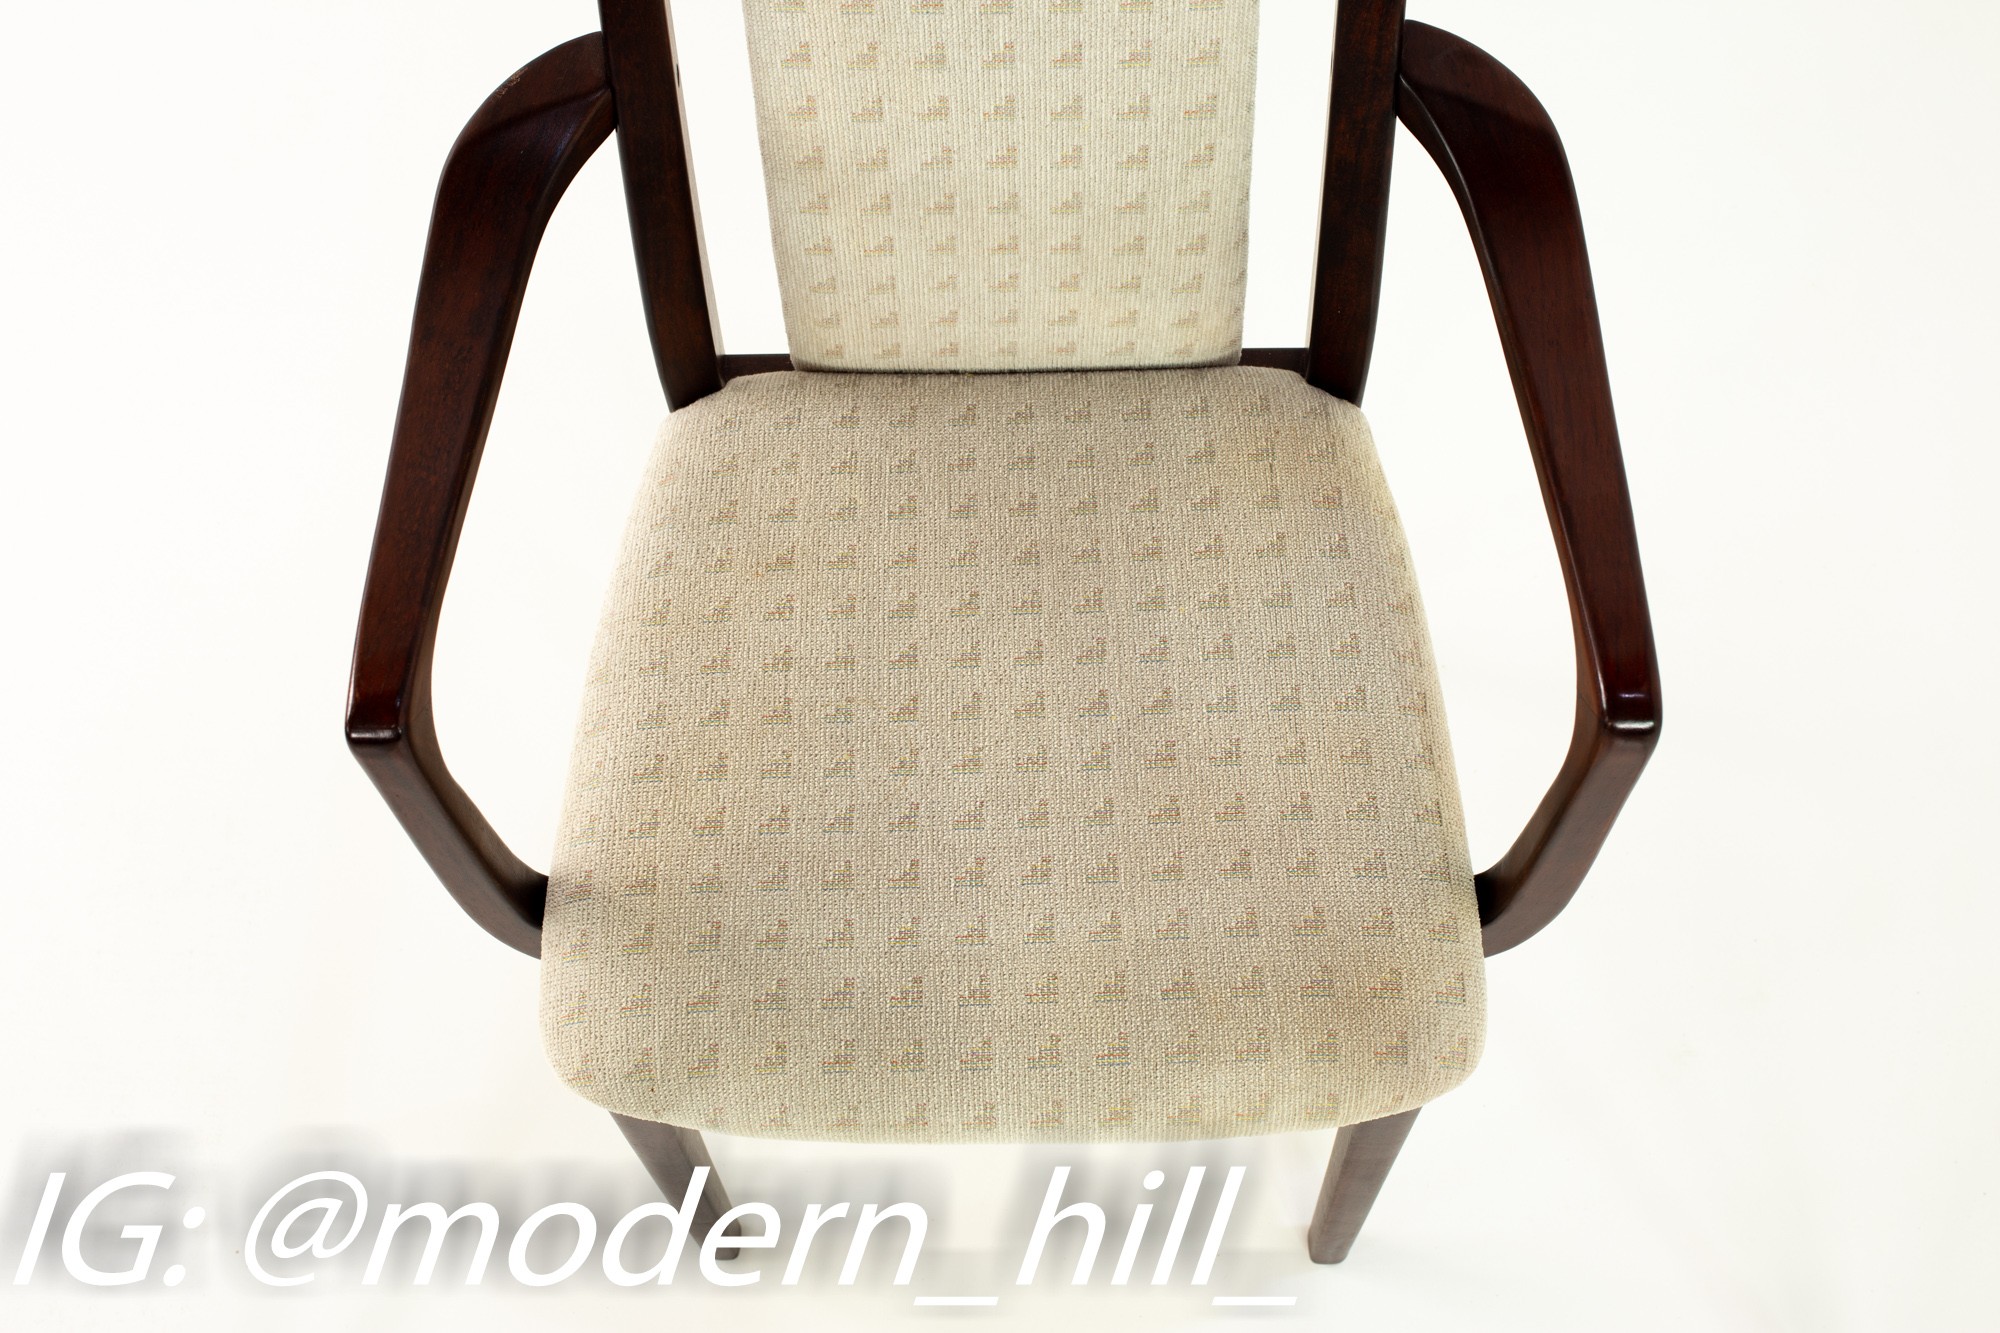 Breox Mobler Snickerinytt Rosewood Mid Century Dining Chairs - Set of 4